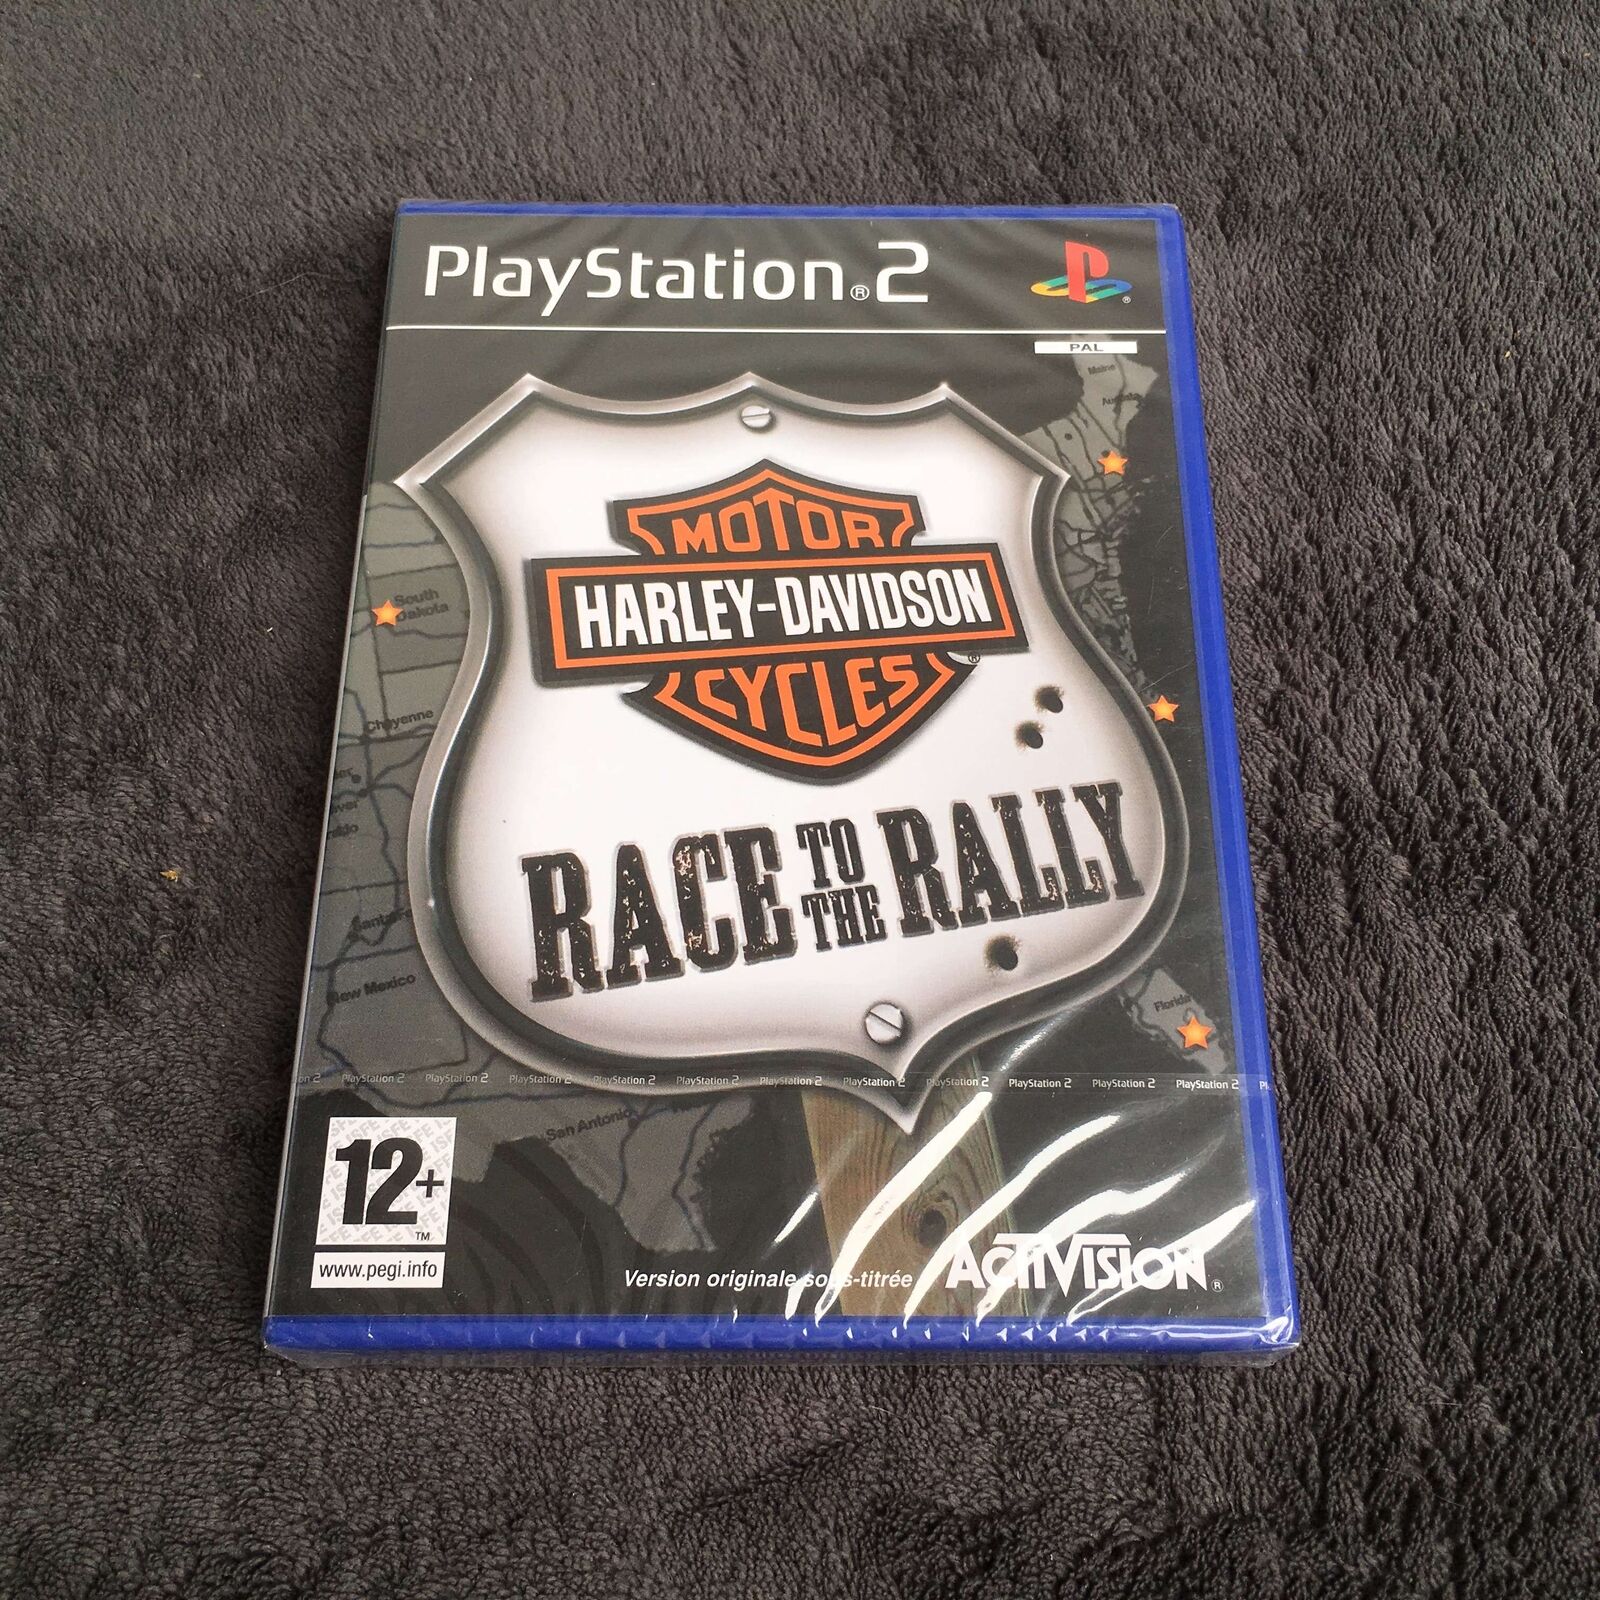 PS2 Motor Harley-Davidson cycles Race to the rally FRA Neuf sous Blister Playsta